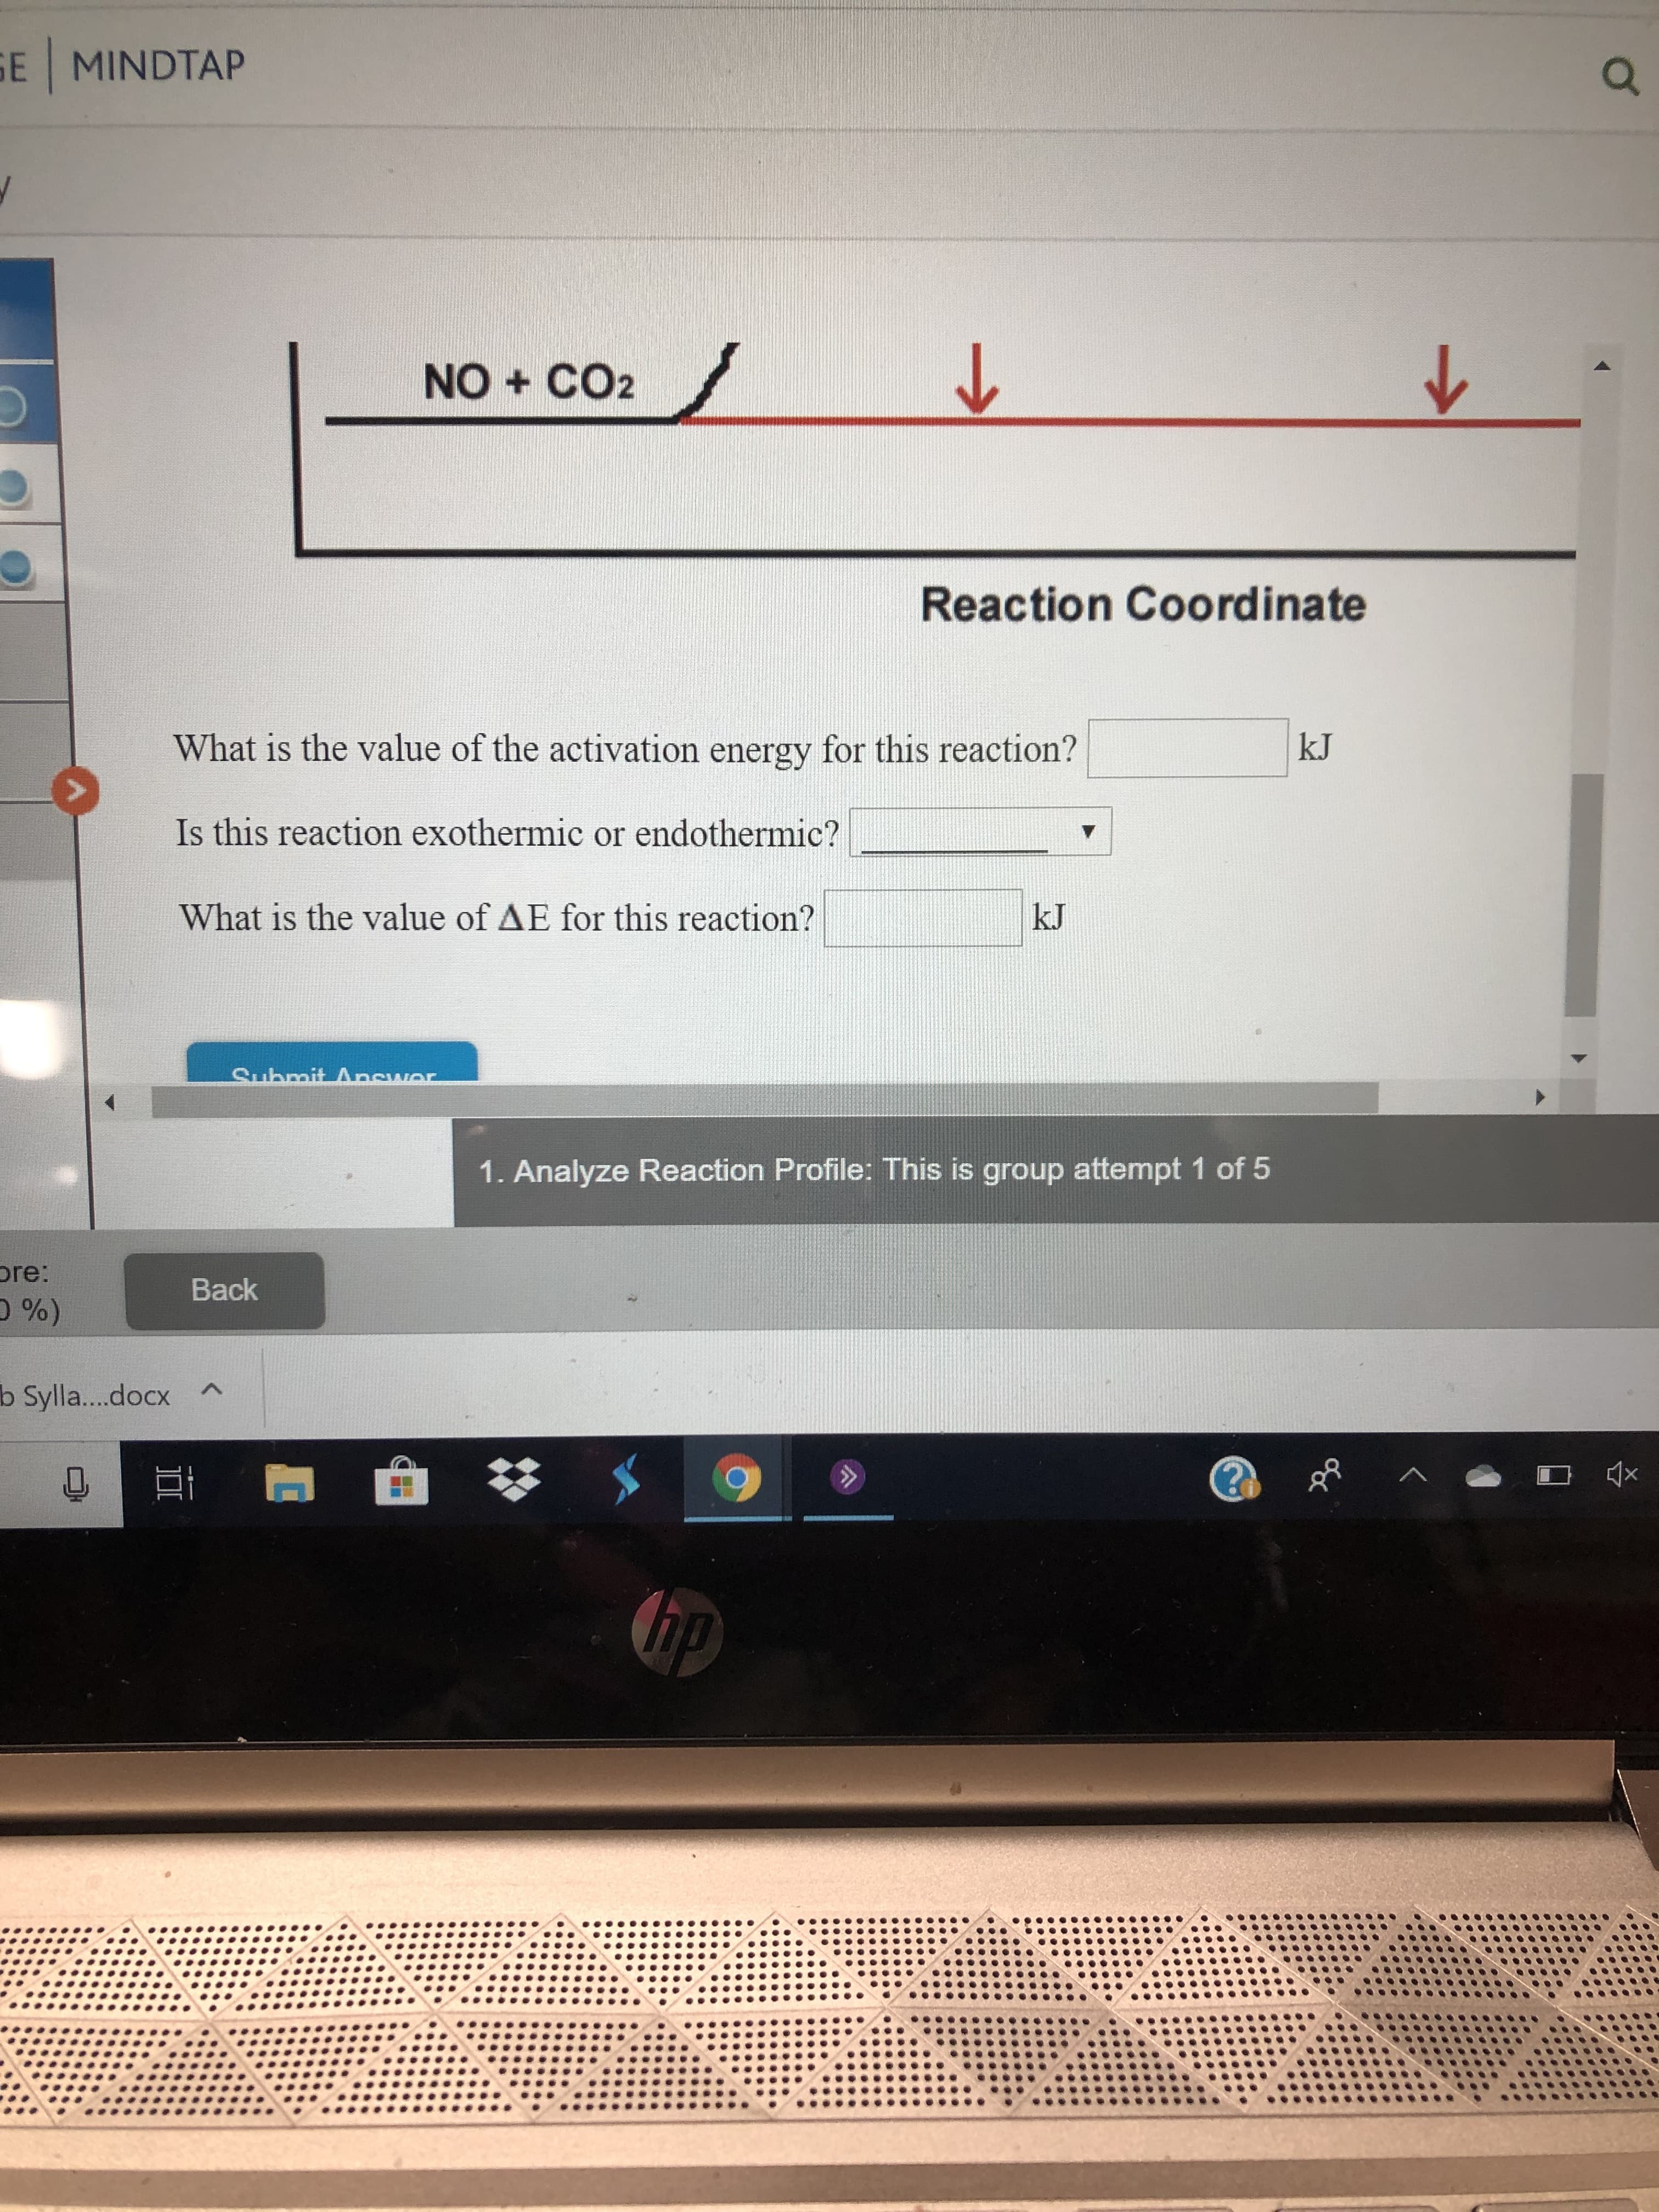 GE MINDTAP
/
NO CO2
Reaction Coordinate
kJ
What is the value of the activation energy for this reaction?
Is this reaction exothermic or endothermic?
What is the value of AE for this reaction?
kJ
Submit Ancwor
1. Analyze Reaction Profile: This is group attempt 1 of 5
ore:
Back
D%)
A
b Sylla....docx
x
ip
